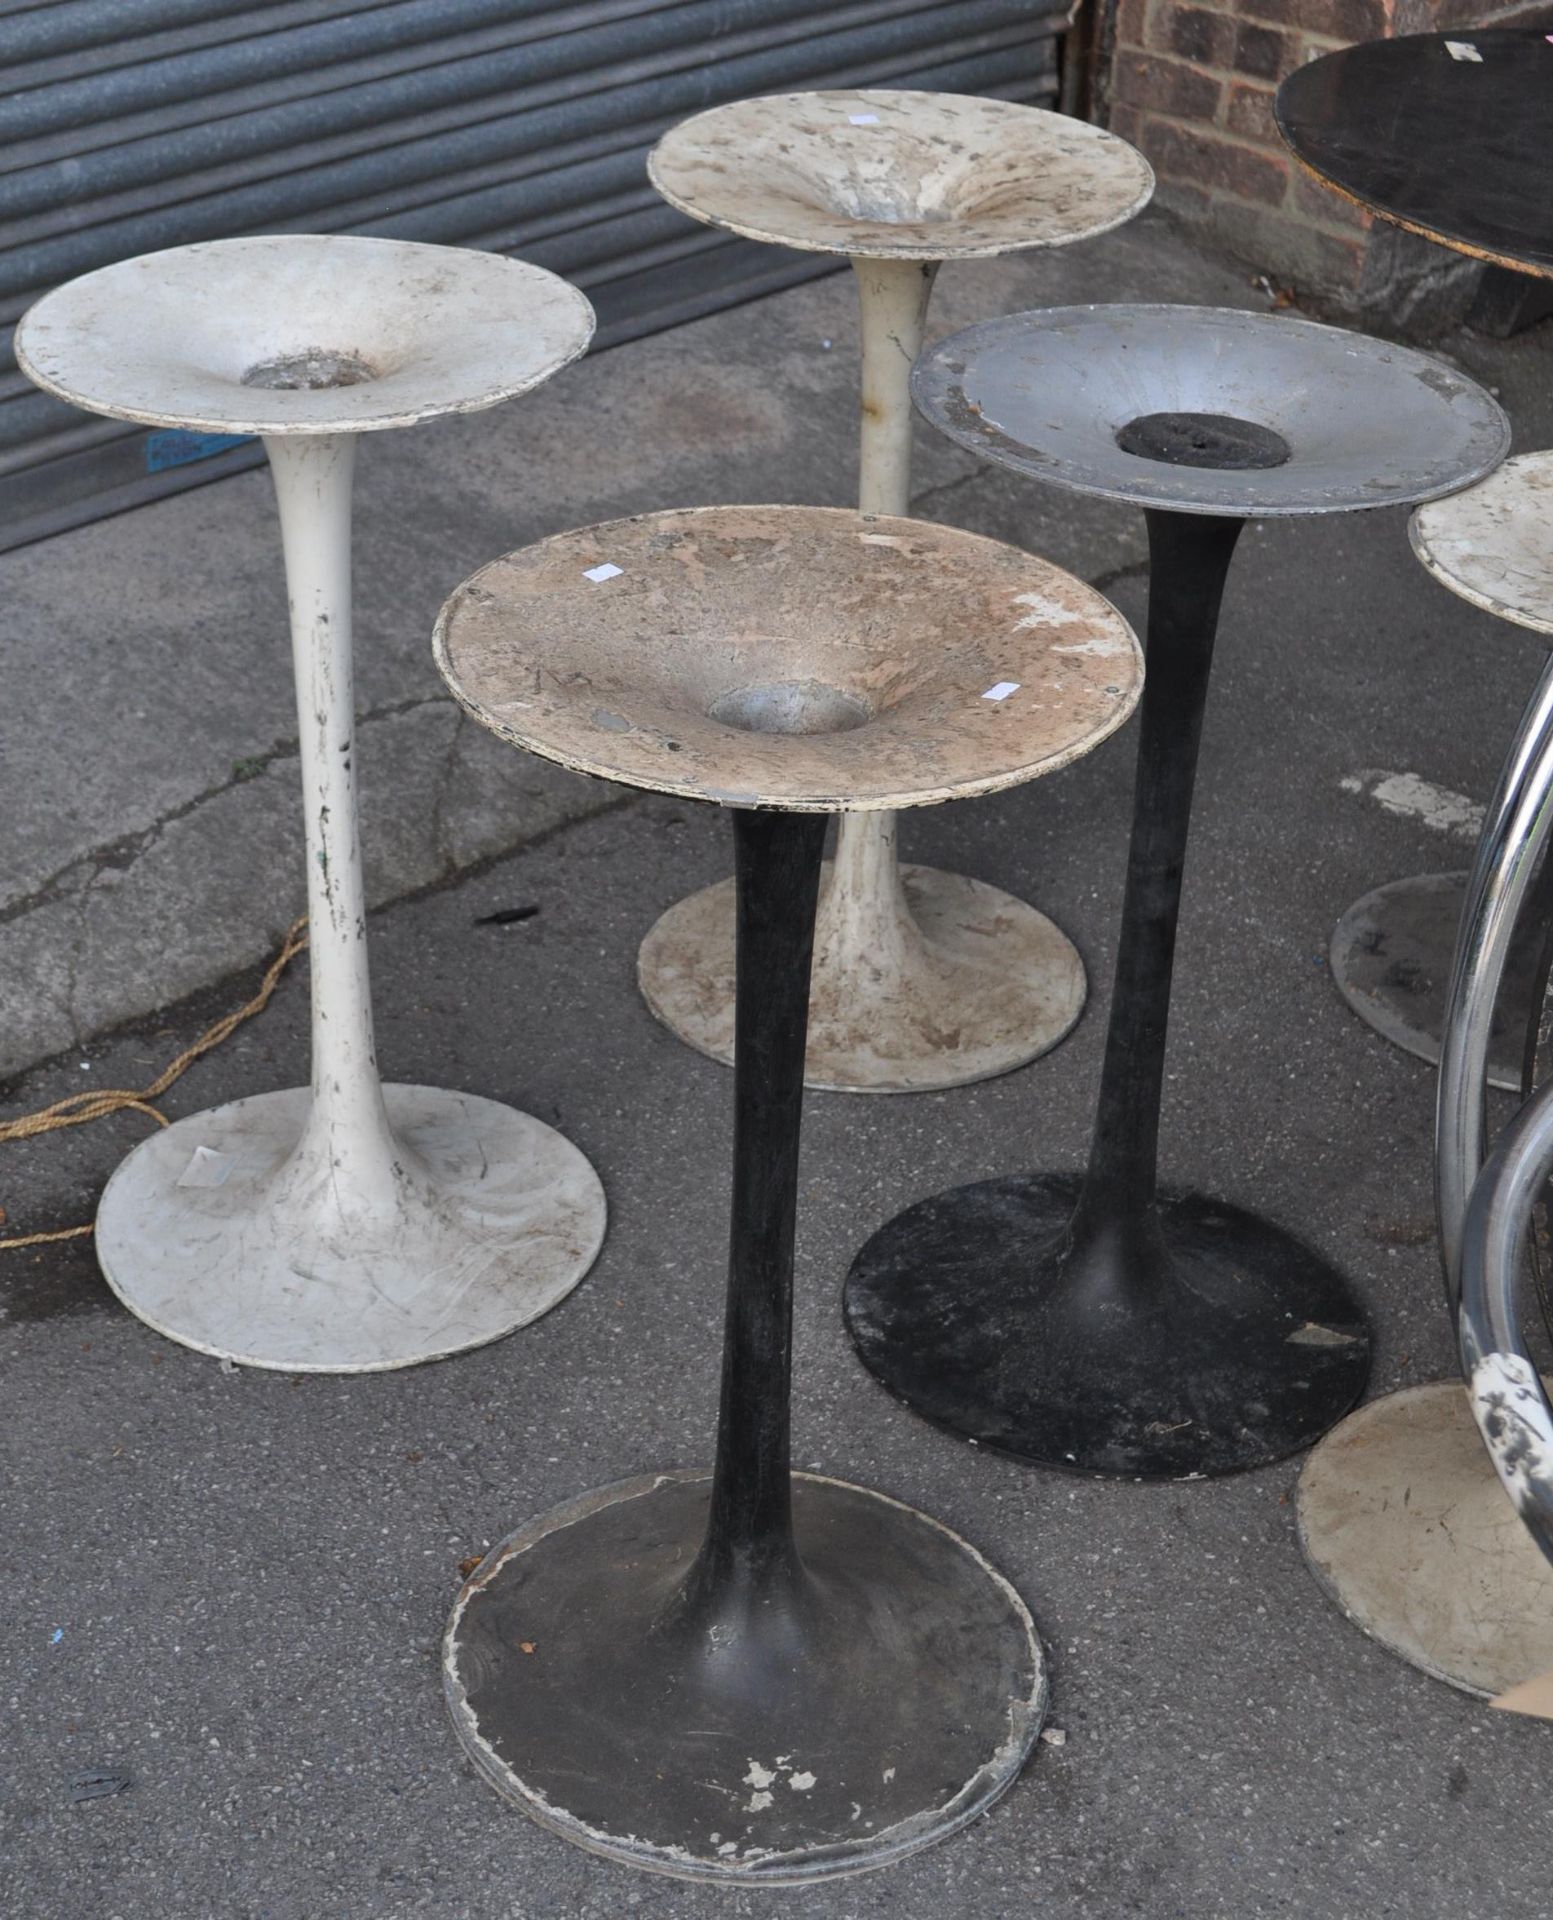 COLLECTION OF ARKANA STYLE INDUSTRIAL TULIP TABLES BASES - Image 2 of 5